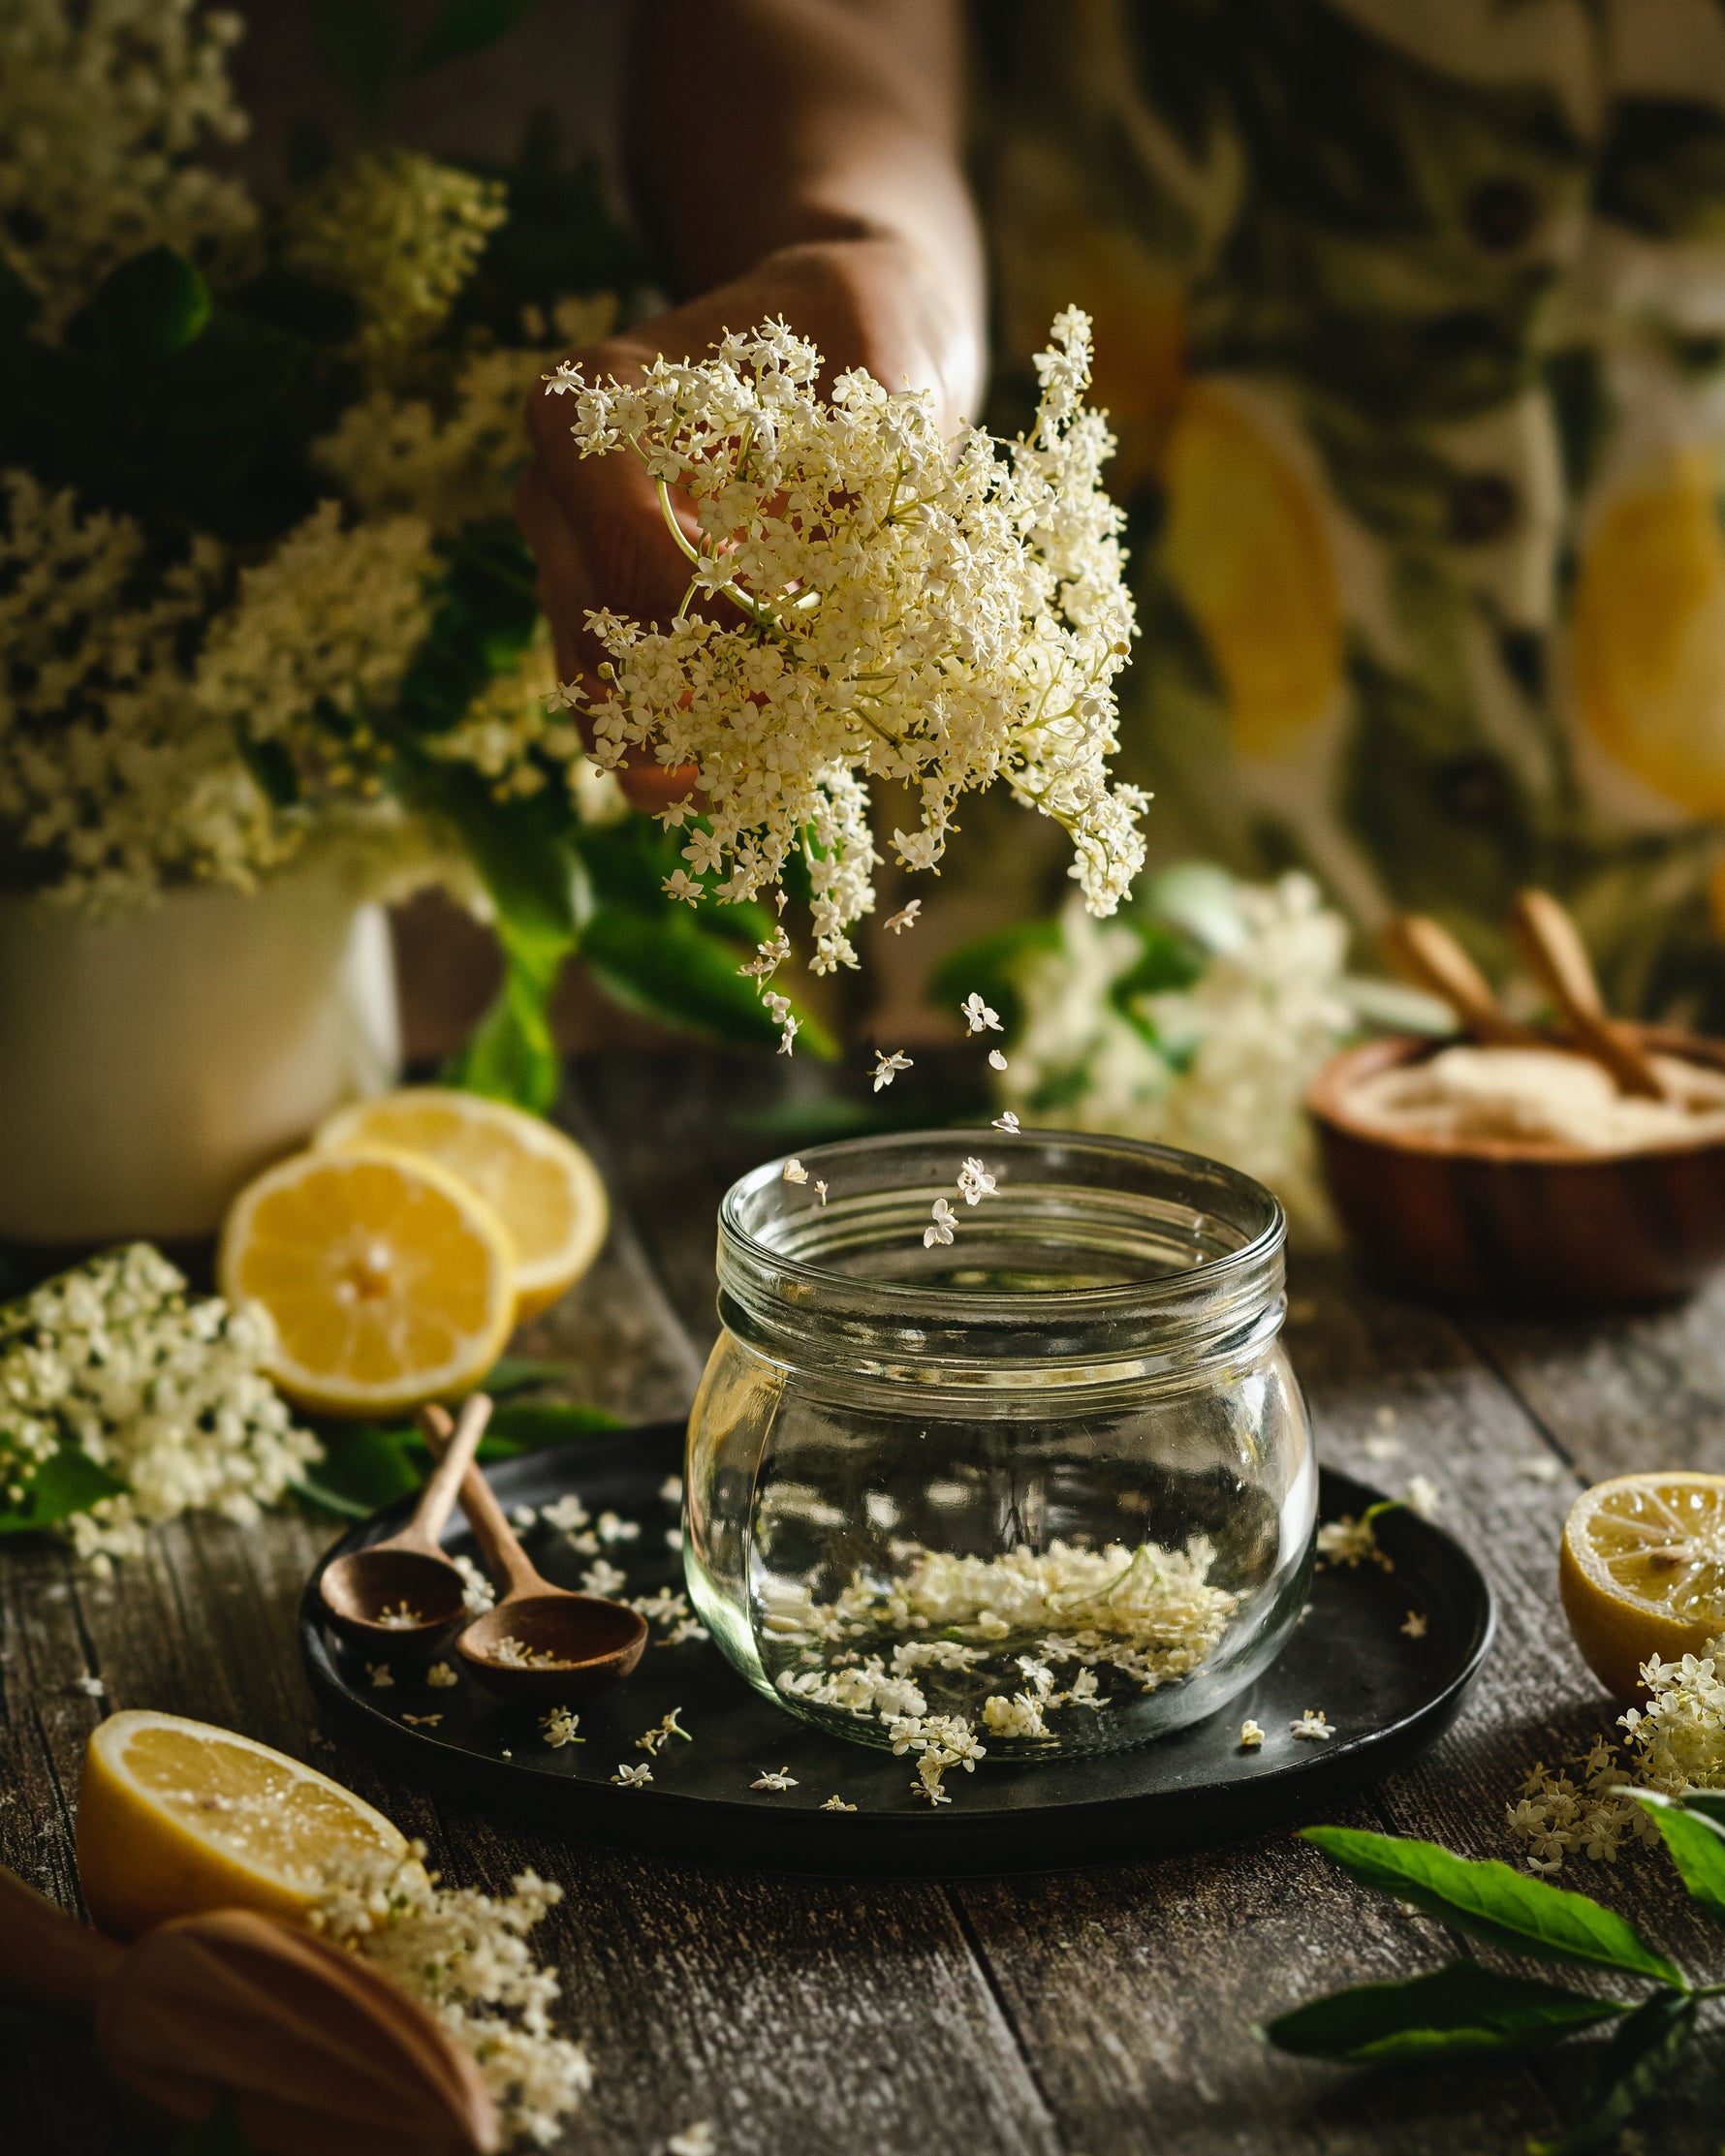 Elderflower Tea: A Delicious and Healthy Herbal Infusion with Medicinal Properties